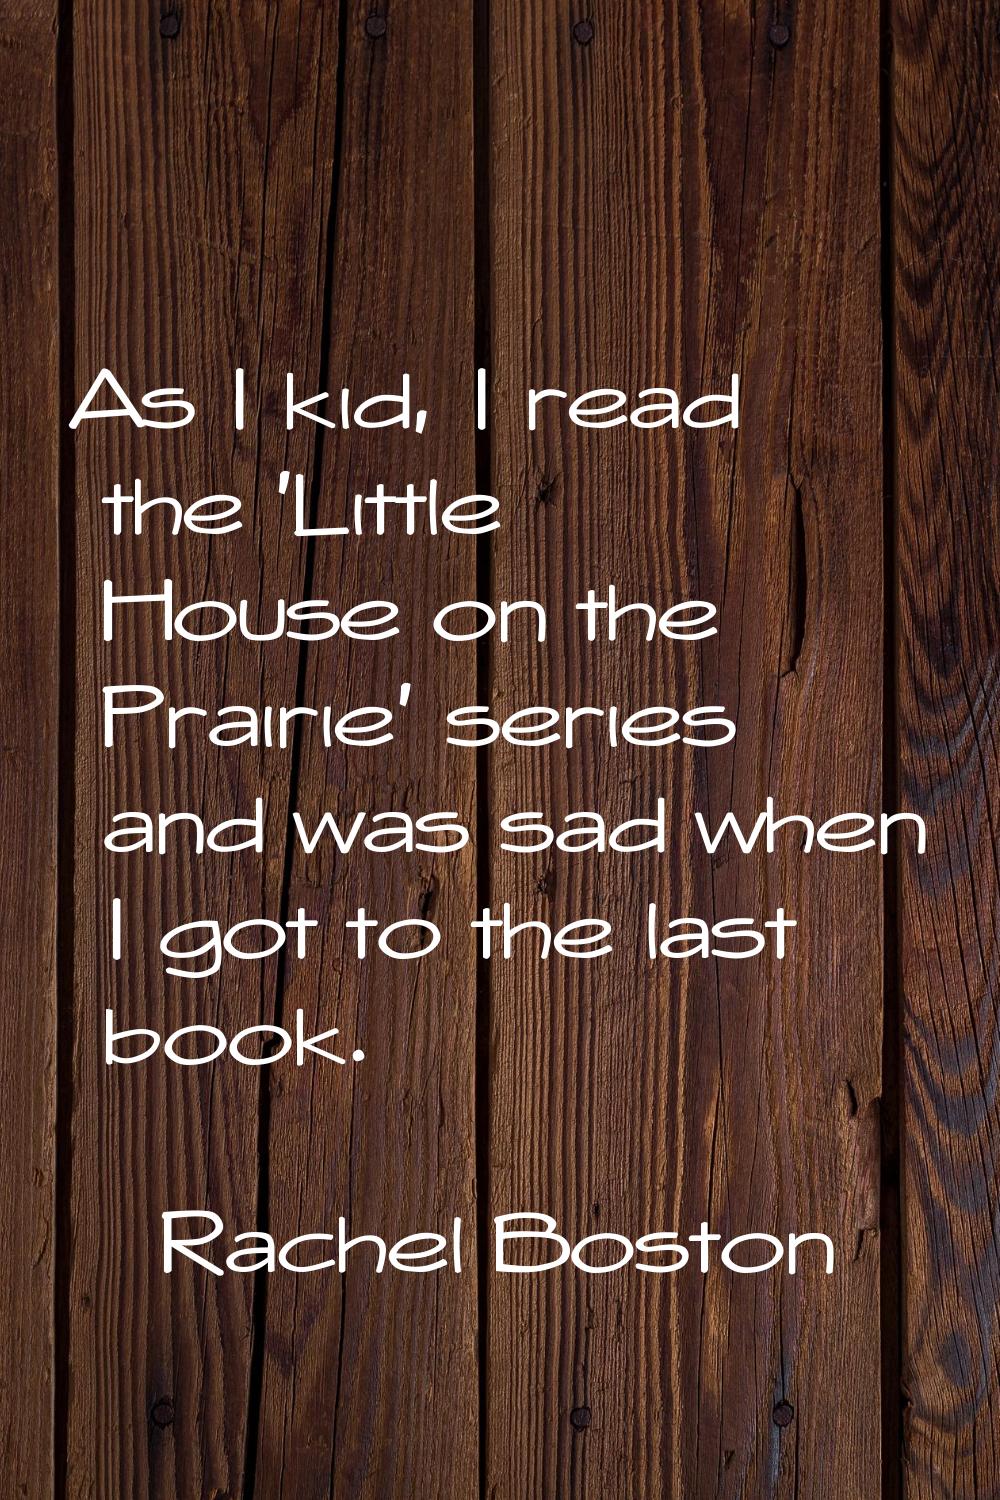 As I kid, I read the 'Little House on the Prairie' series and was sad when I got to the last book.